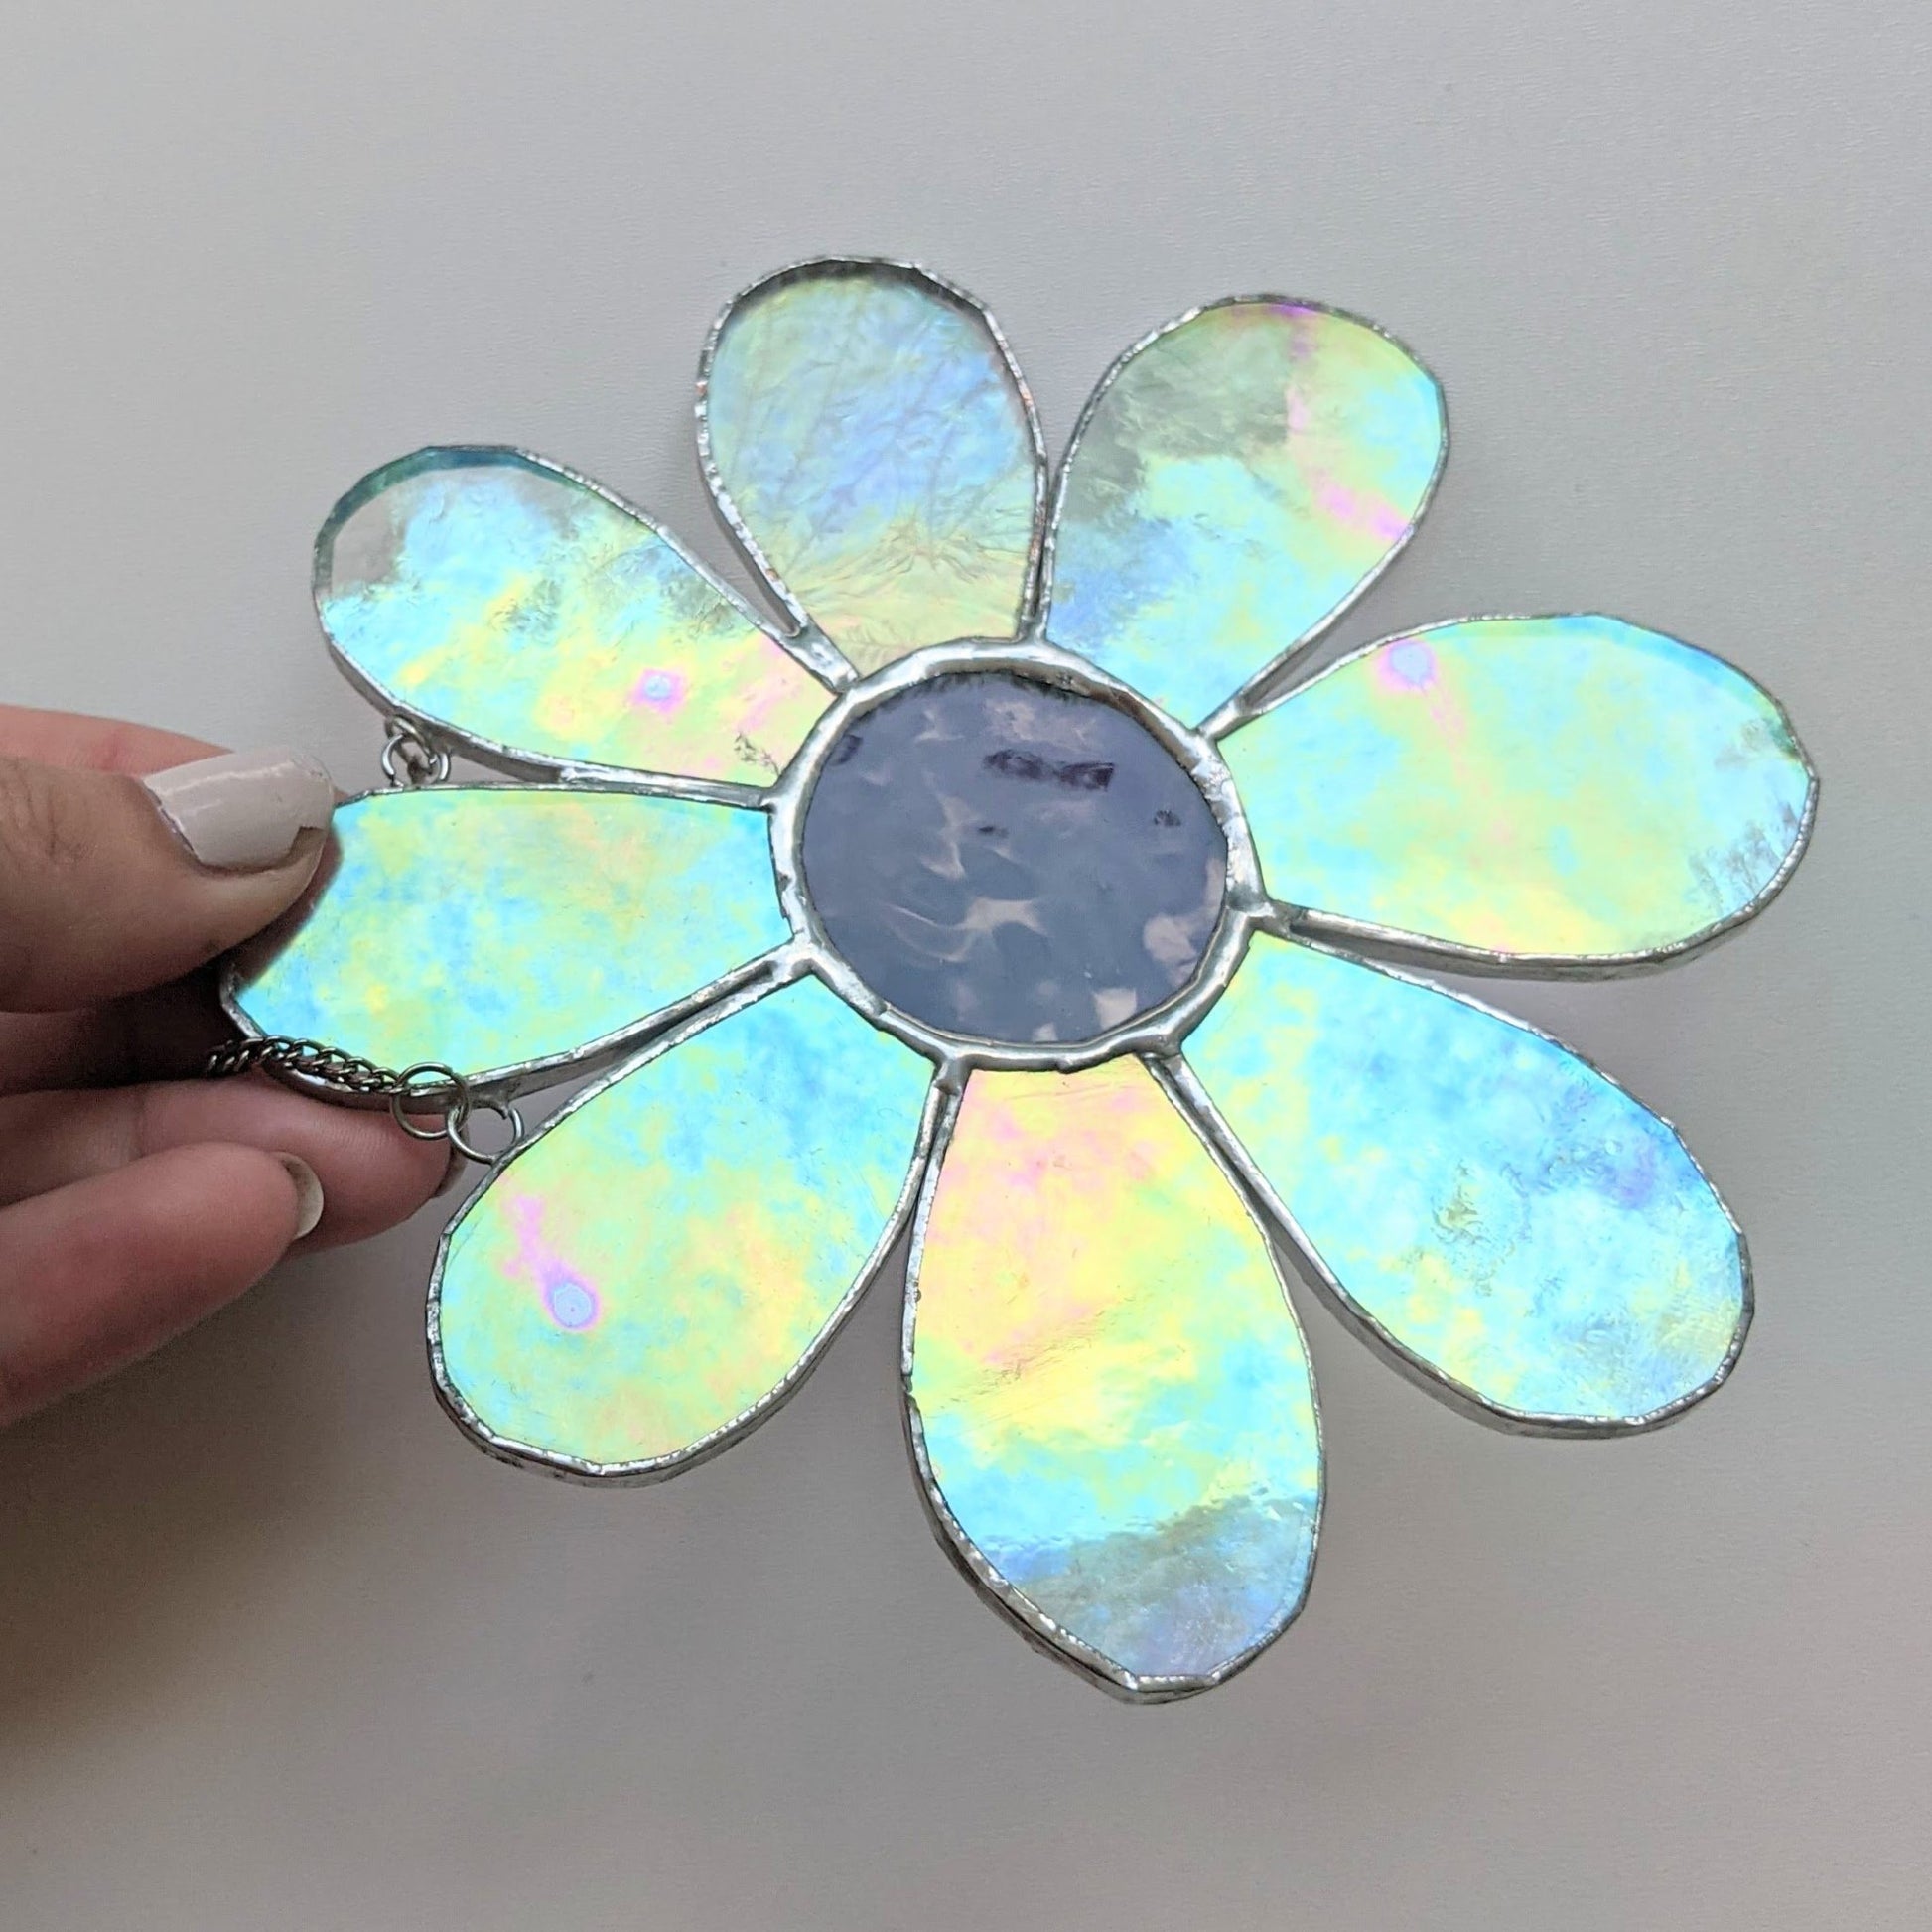 Stained Glass | Iridescent Daisy #3 - Freehand Market -Freehand Market